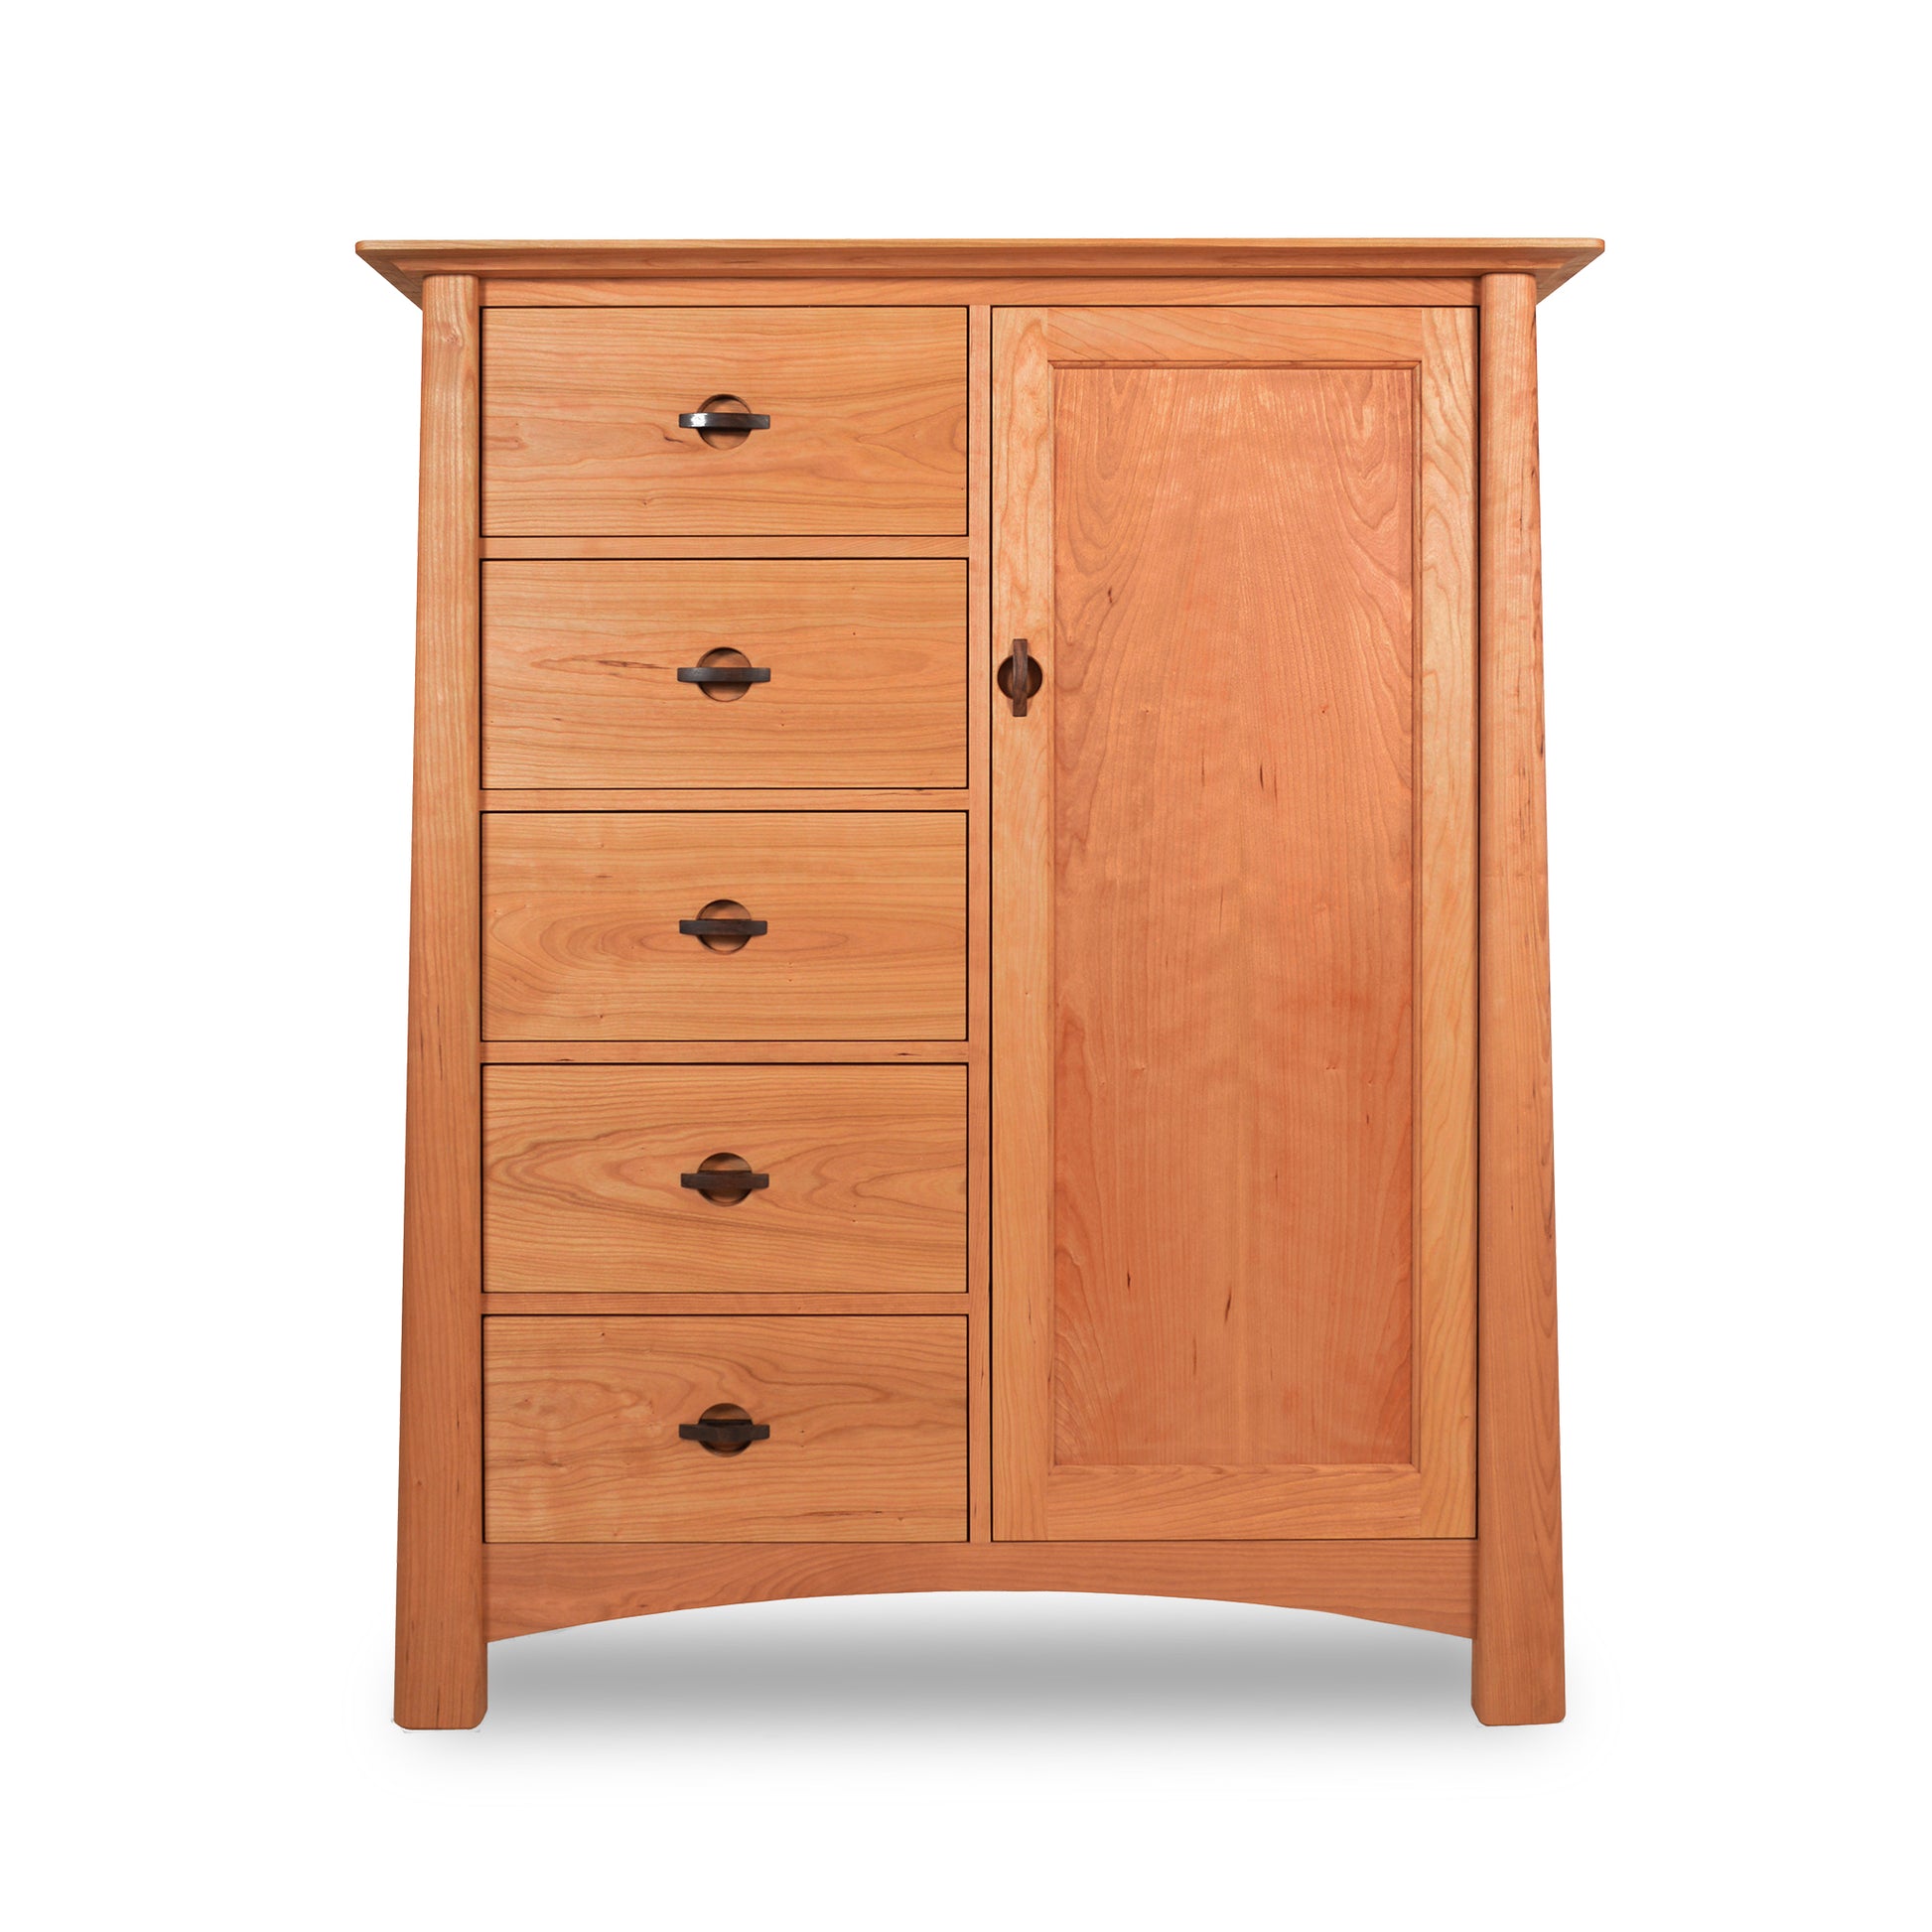 A Cherry Moon Sweater Chest by Maple Corner Woodworks with a natural, eco-friendly oil finish, featuring five drawers on the left side and one door on the right, all with round metal handles. The cabinet is set against a white background.